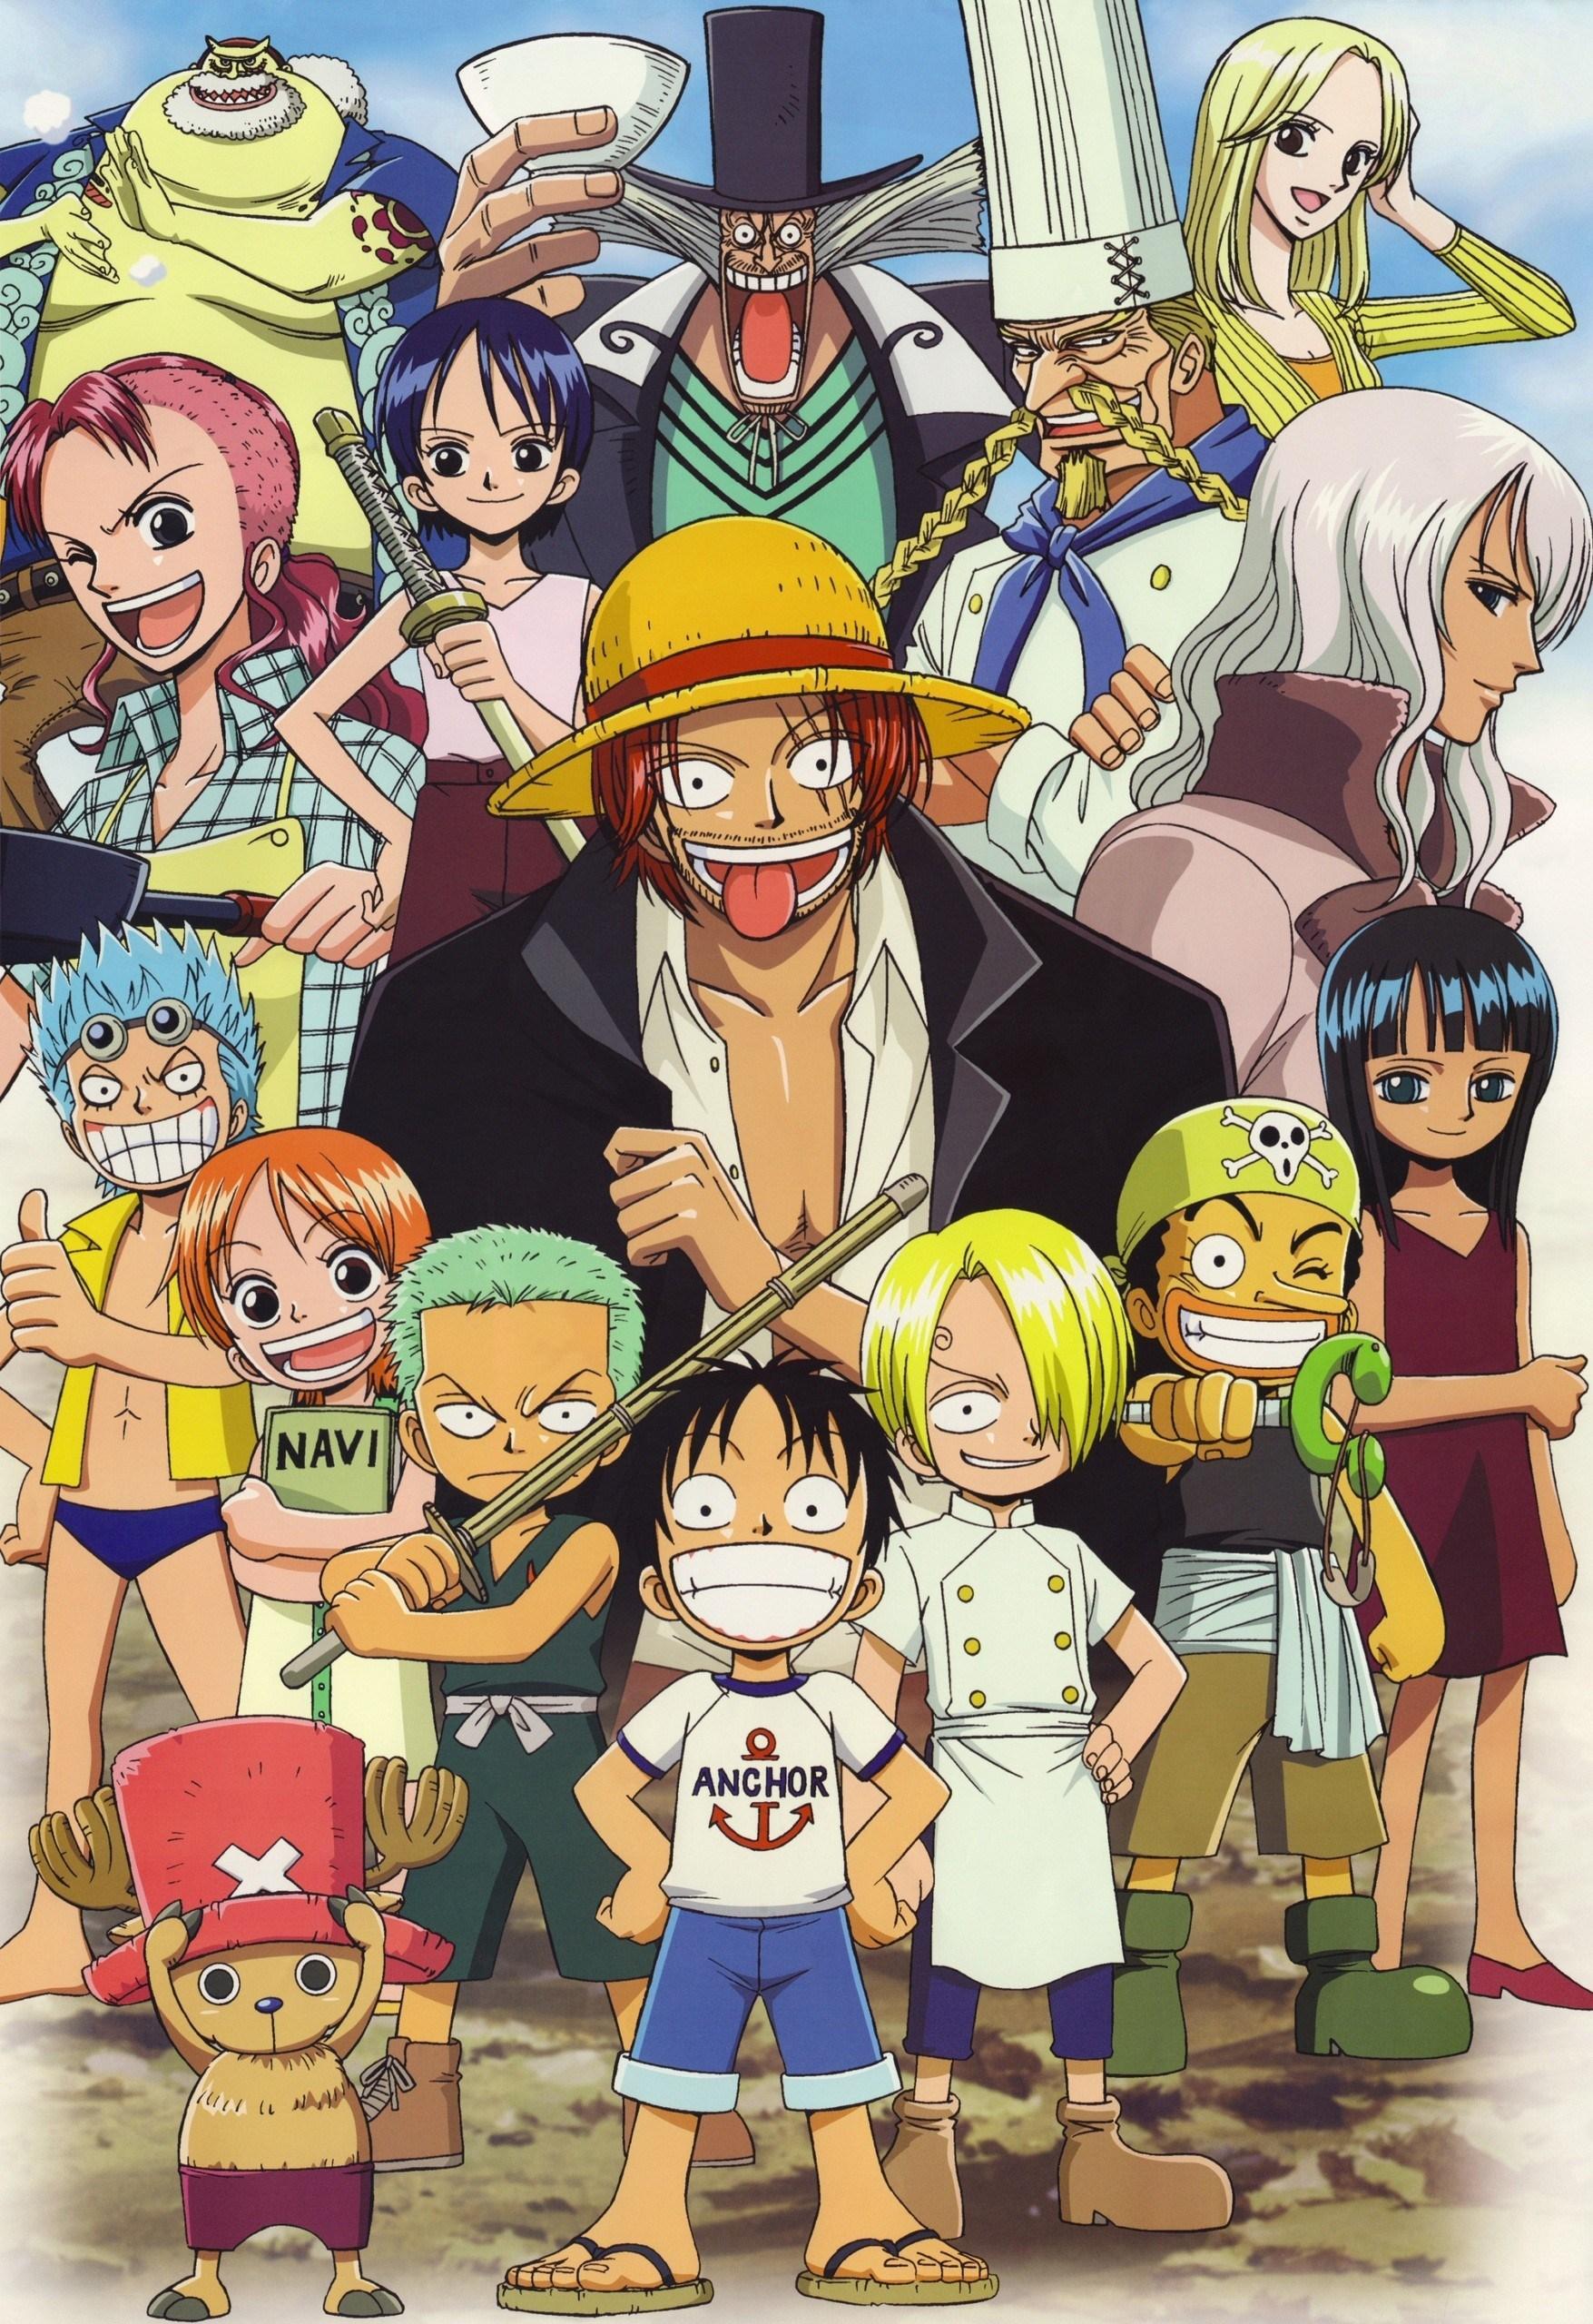 Download <== Anime One Piece HD Wallpaper For S7 Edge